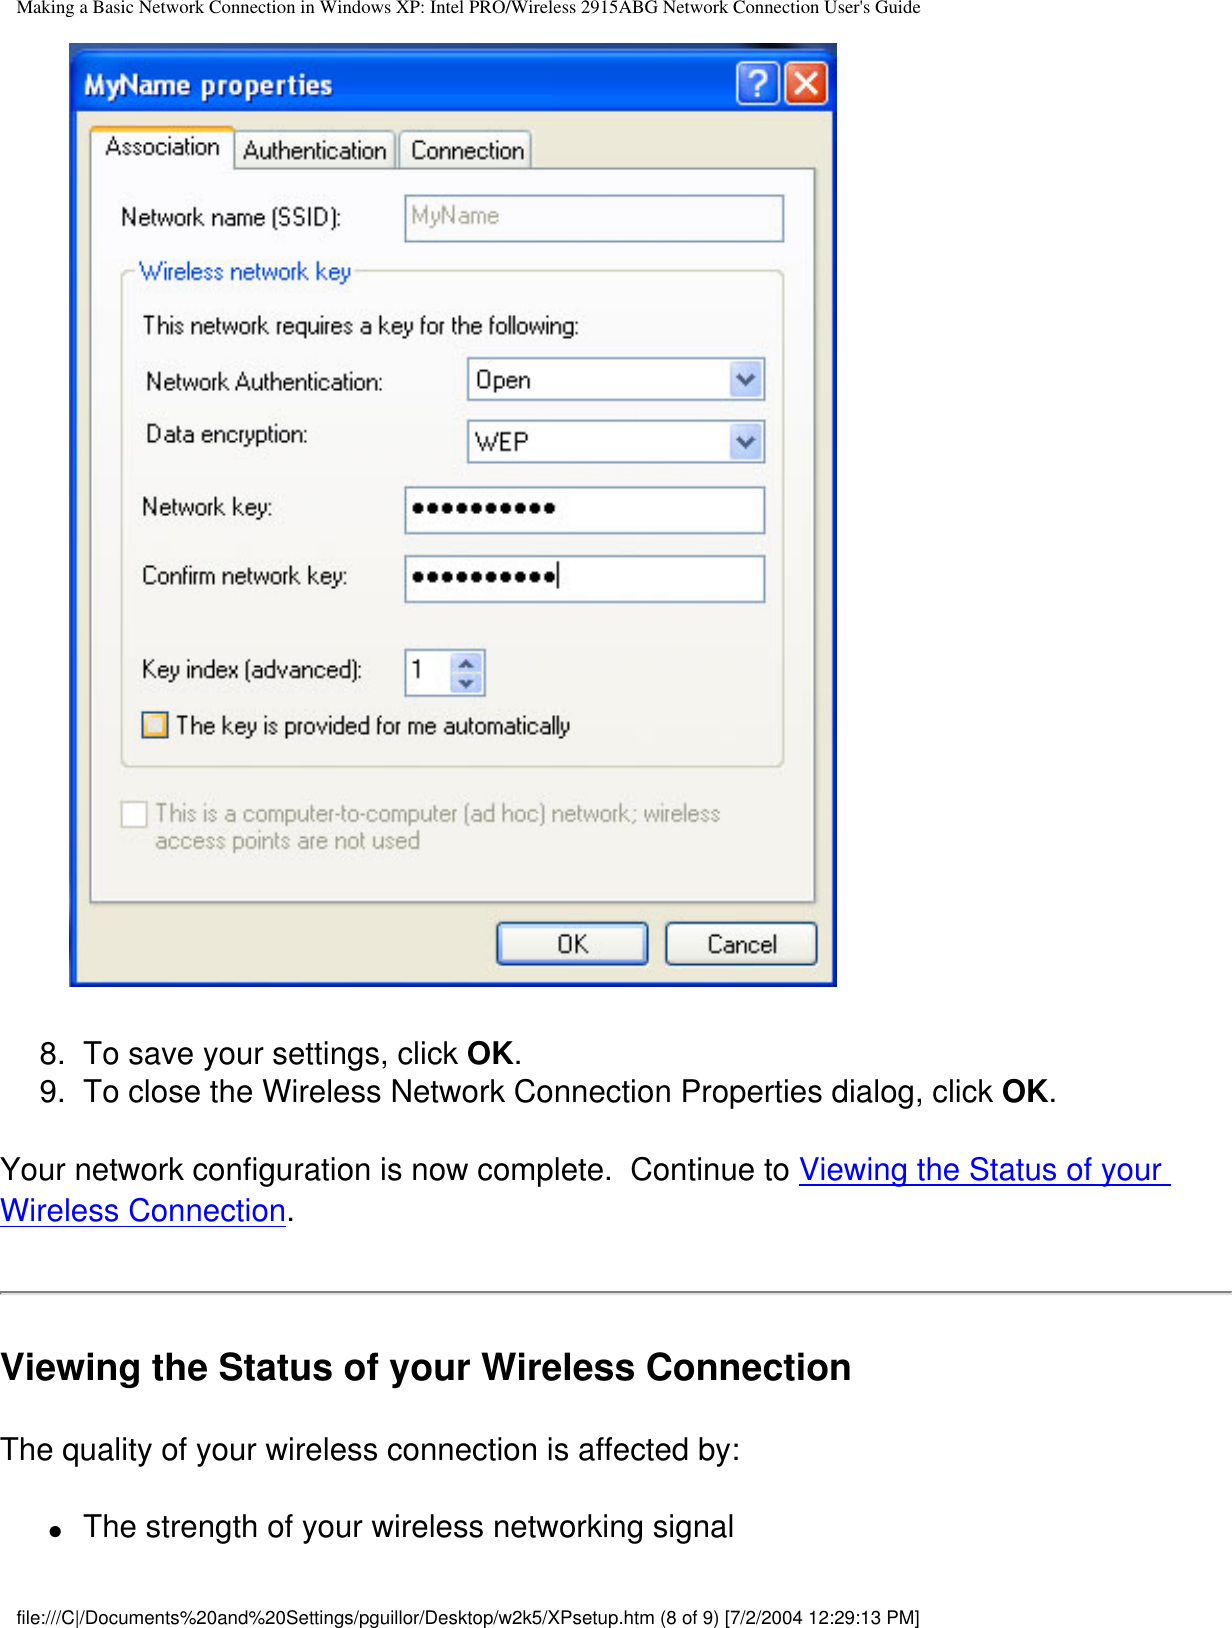 Making a Basic Network Connection in Windows XP: Intel PRO/Wireless 2915ABG Network Connection User&apos;s Guide        8.  To save your settings, click OK.9.  To close the Wireless Network Connection Properties dialog, click OK.Your network configuration is now complete.  Continue to Viewing the Status of your Wireless Connection.Viewing the Status of your Wireless ConnectionThe quality of your wireless connection is affected by: ●     The strength of your wireless networking signalfile:///C|/Documents%20and%20Settings/pguillor/Desktop/w2k5/XPsetup.htm (8 of 9) [7/2/2004 12:29:13 PM]